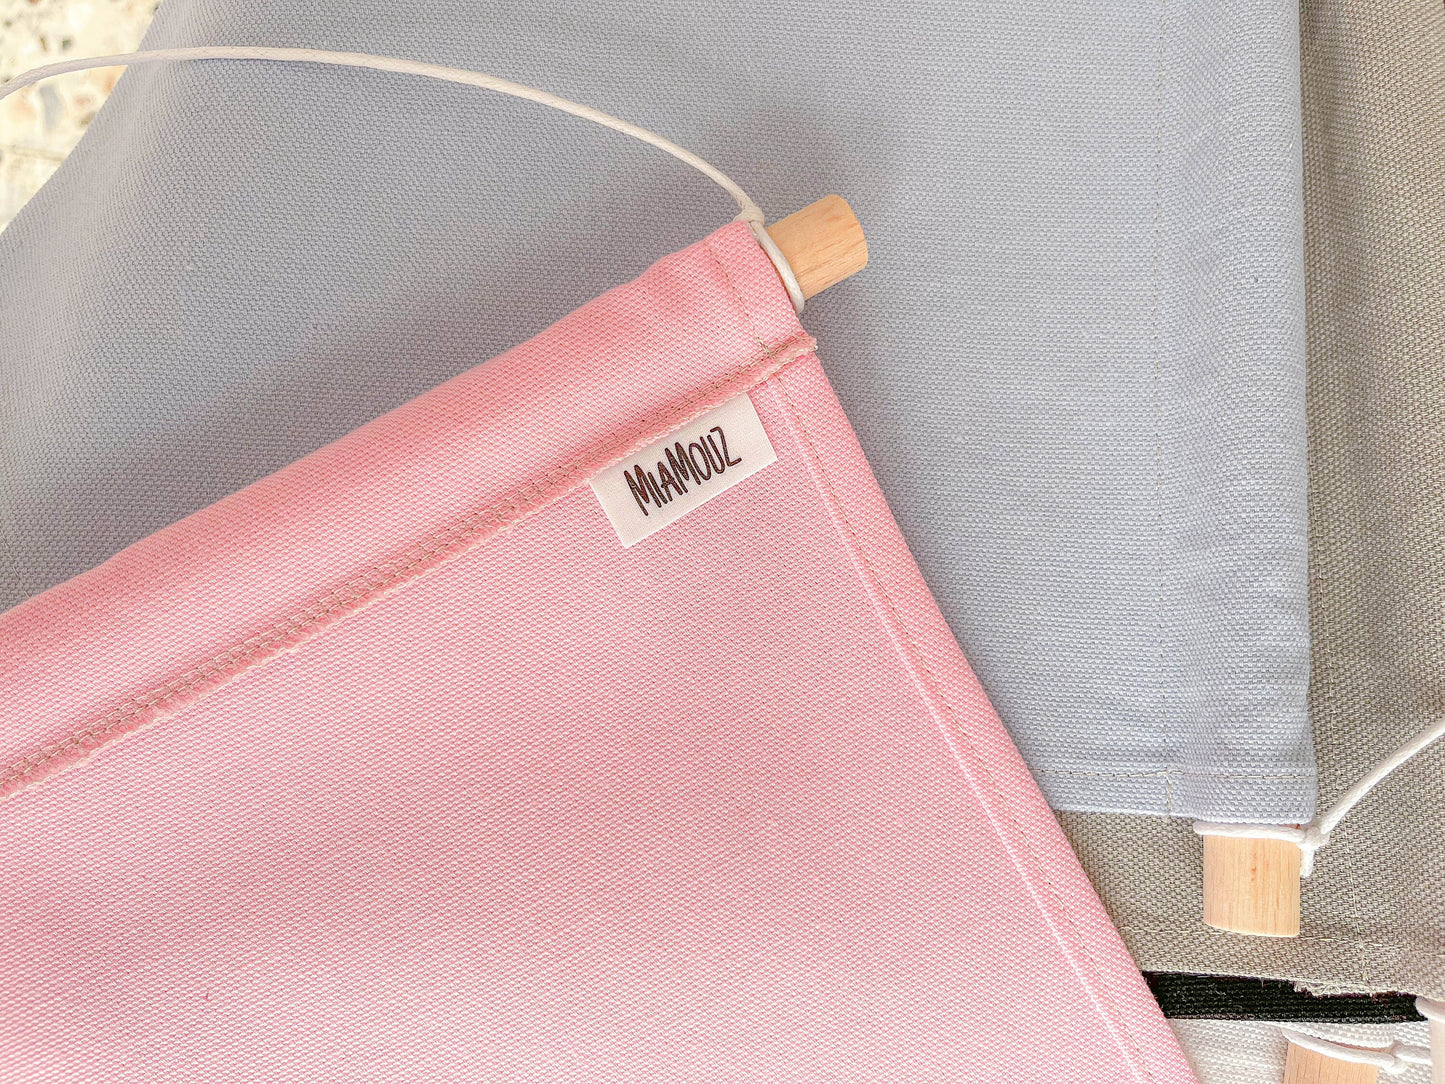 Cute Cotton Pin Banner | M 16cm x 22cm | Handmade in Germany | Light Pink Canvas Fabric | Classic Pin Display